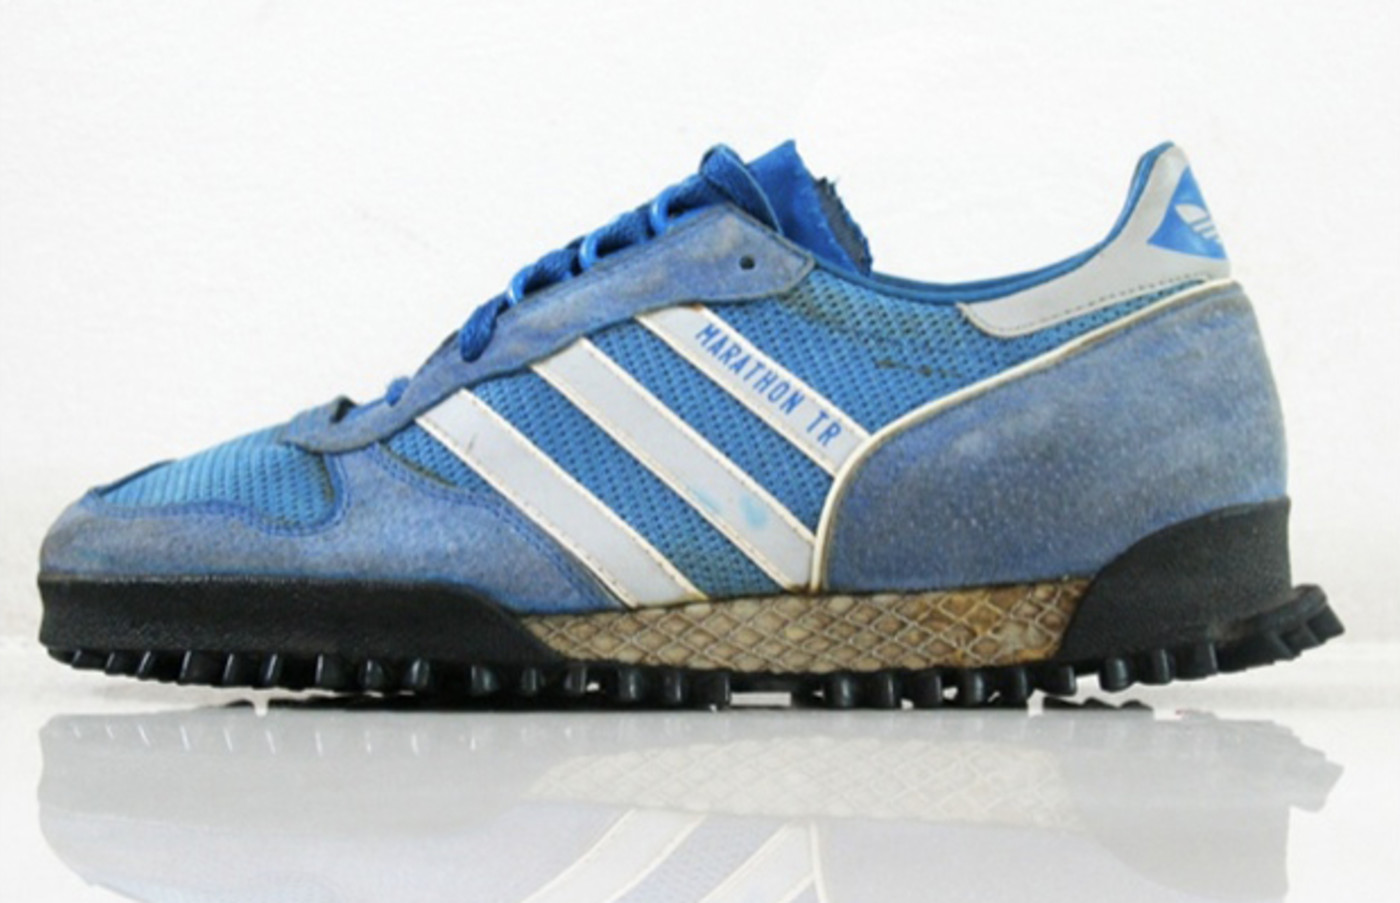 adidas trainers from the 80s